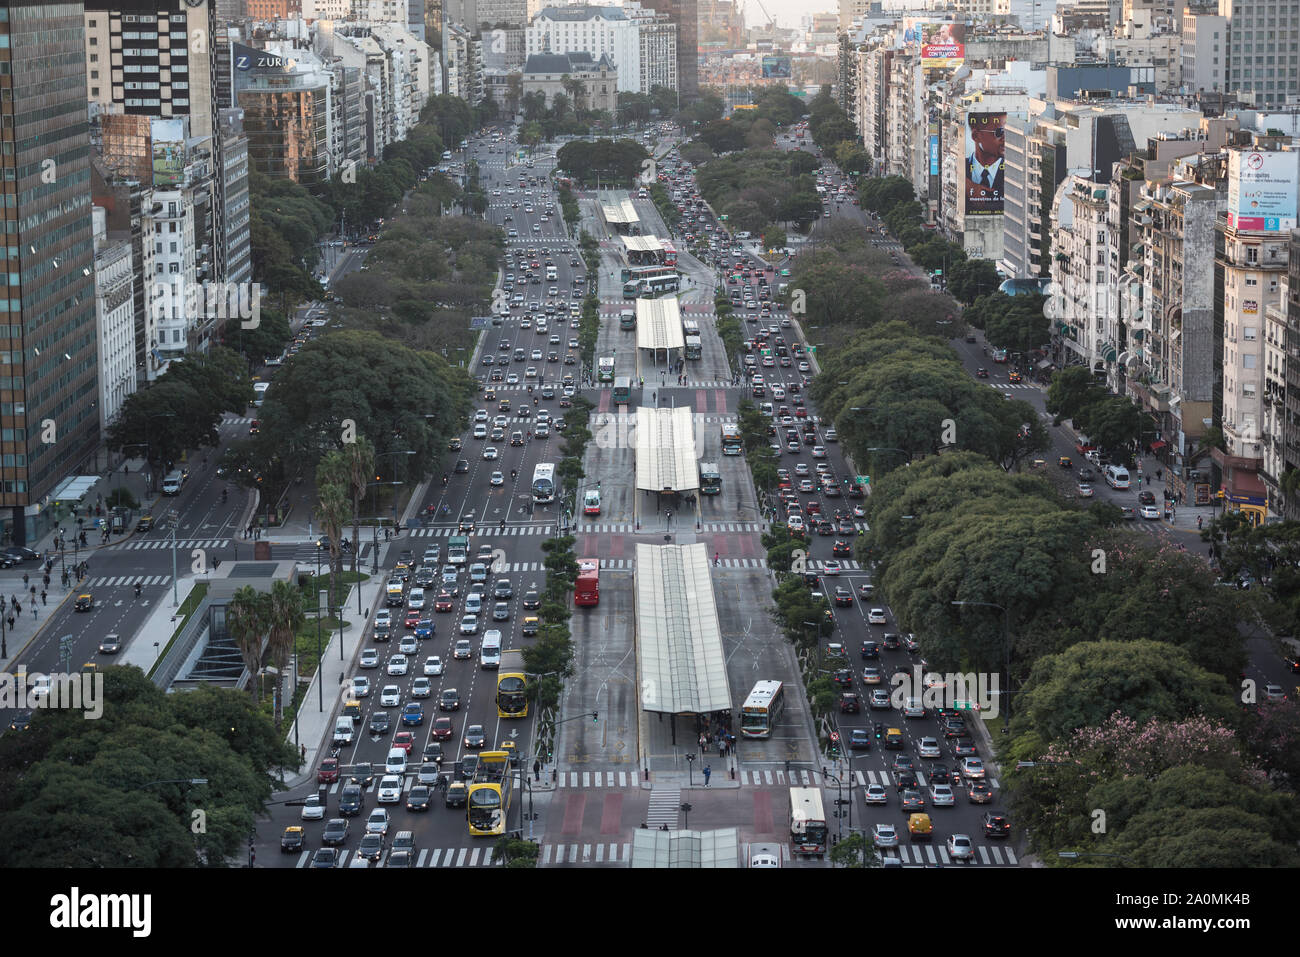 Buenos Aires, Argentina - May 4 2015: Rush hour, metrobus and traffic on the sreets of Buenos Aires city. This photo shows the 9 de Julio Avenue. Stock Photo